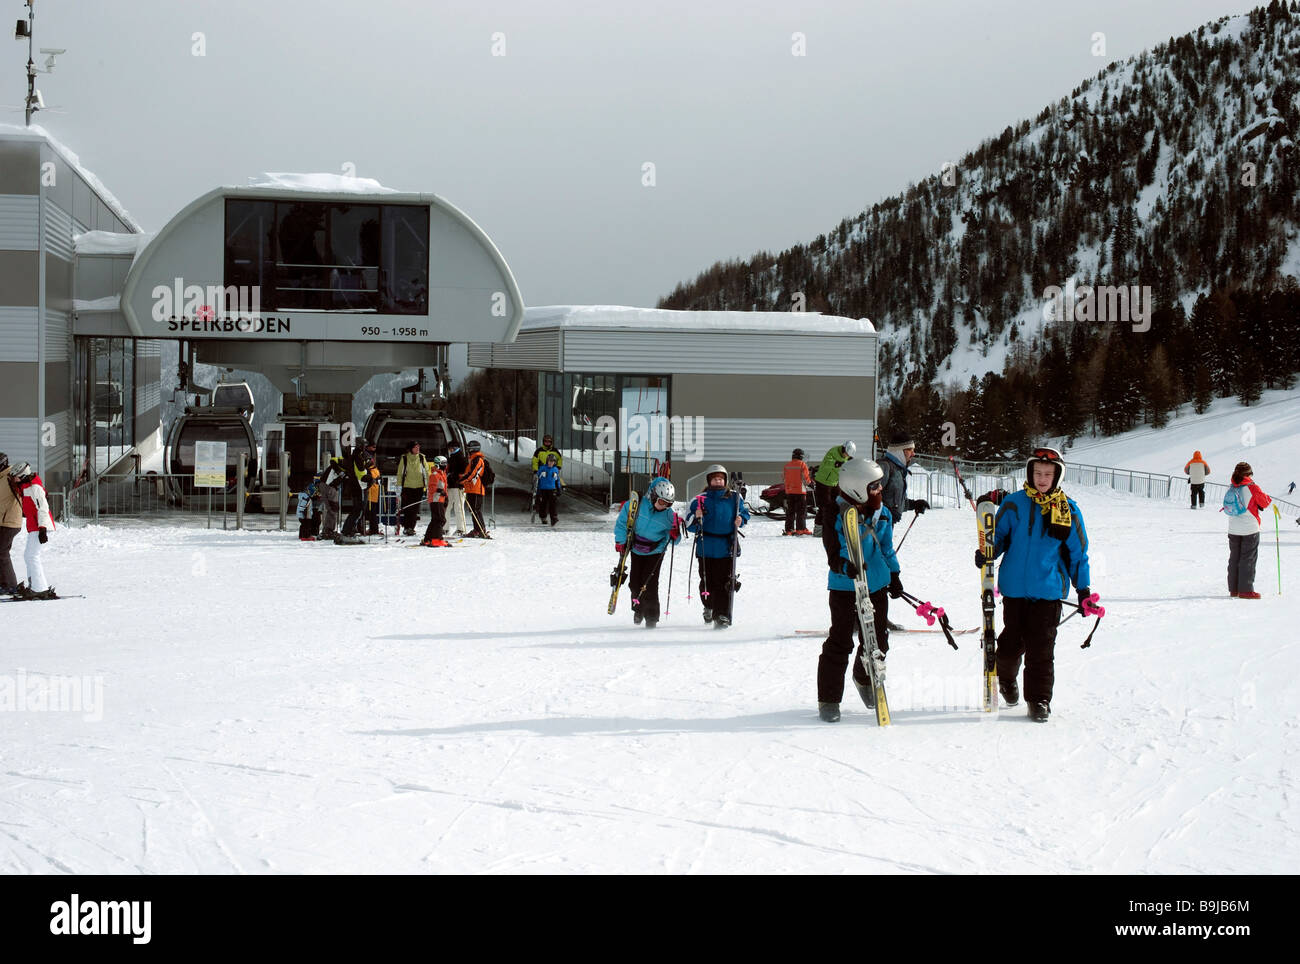 Skiers in front of cablecar, Speikboden, Ahrntal, South Tyrol, Italy, Europe Stock Photo